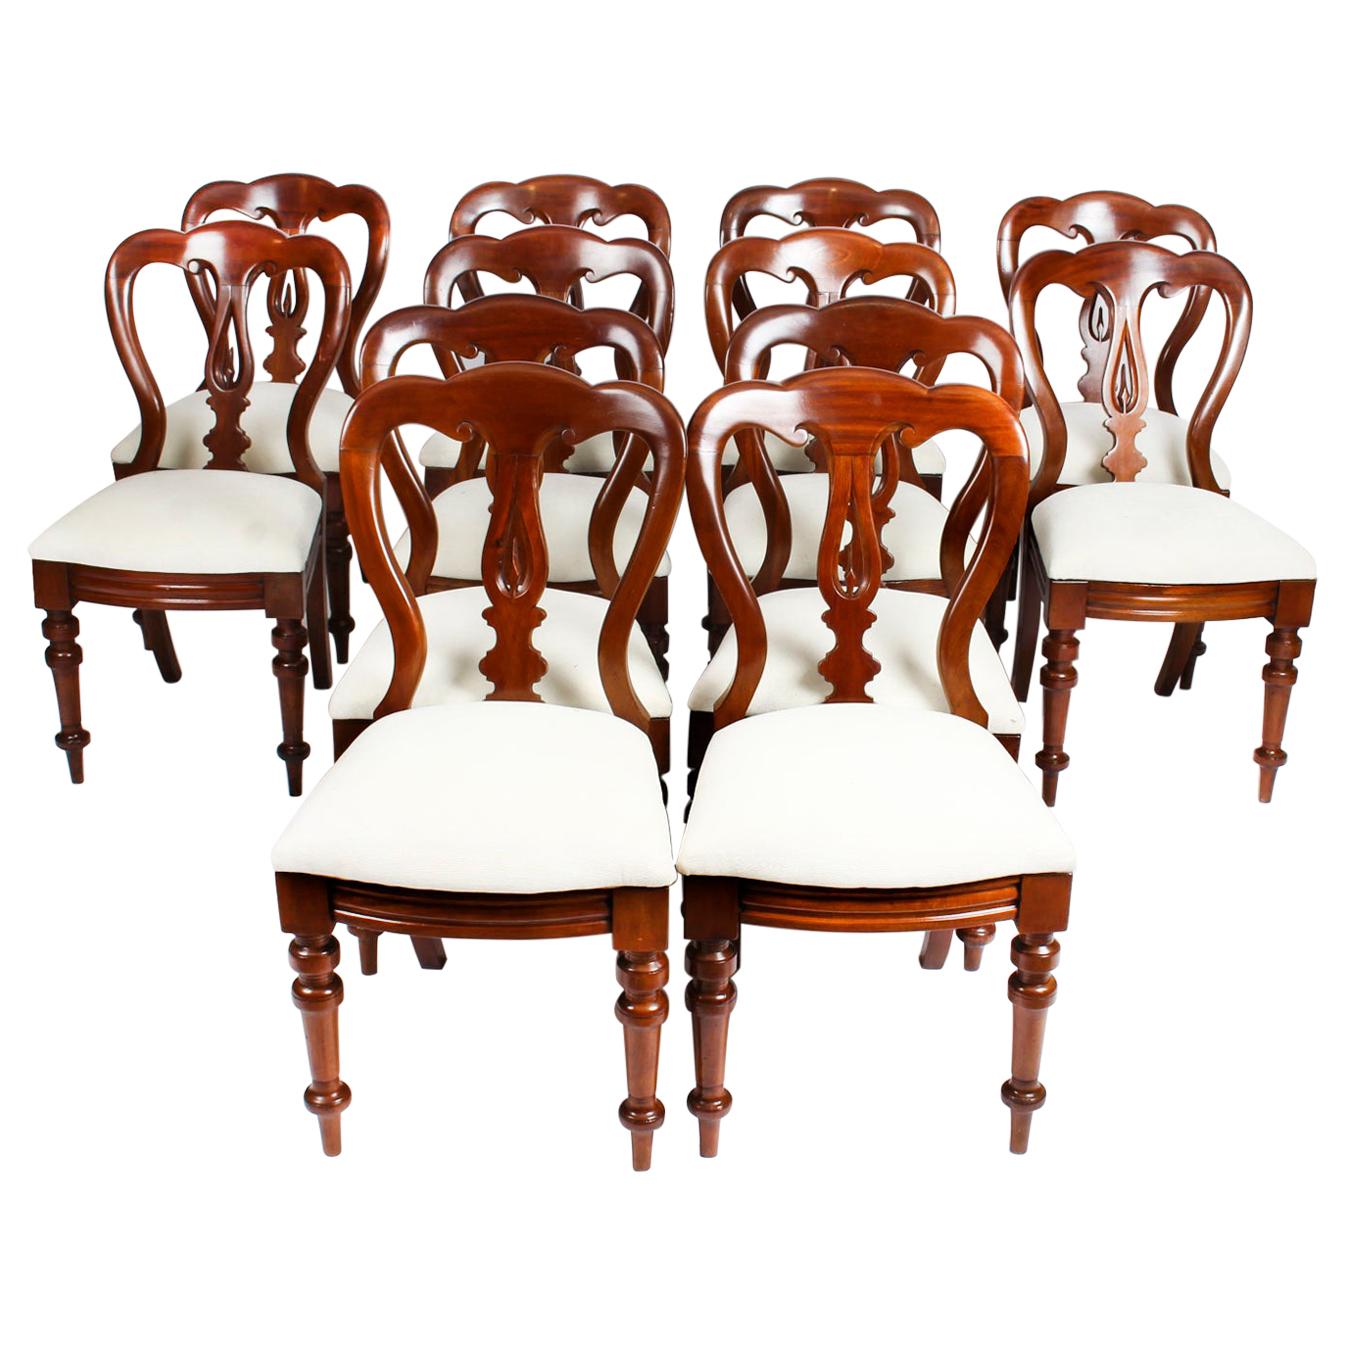 Antique Set of 12 Victorian Mahogany Spoon Back Dining Chairs 19th Century